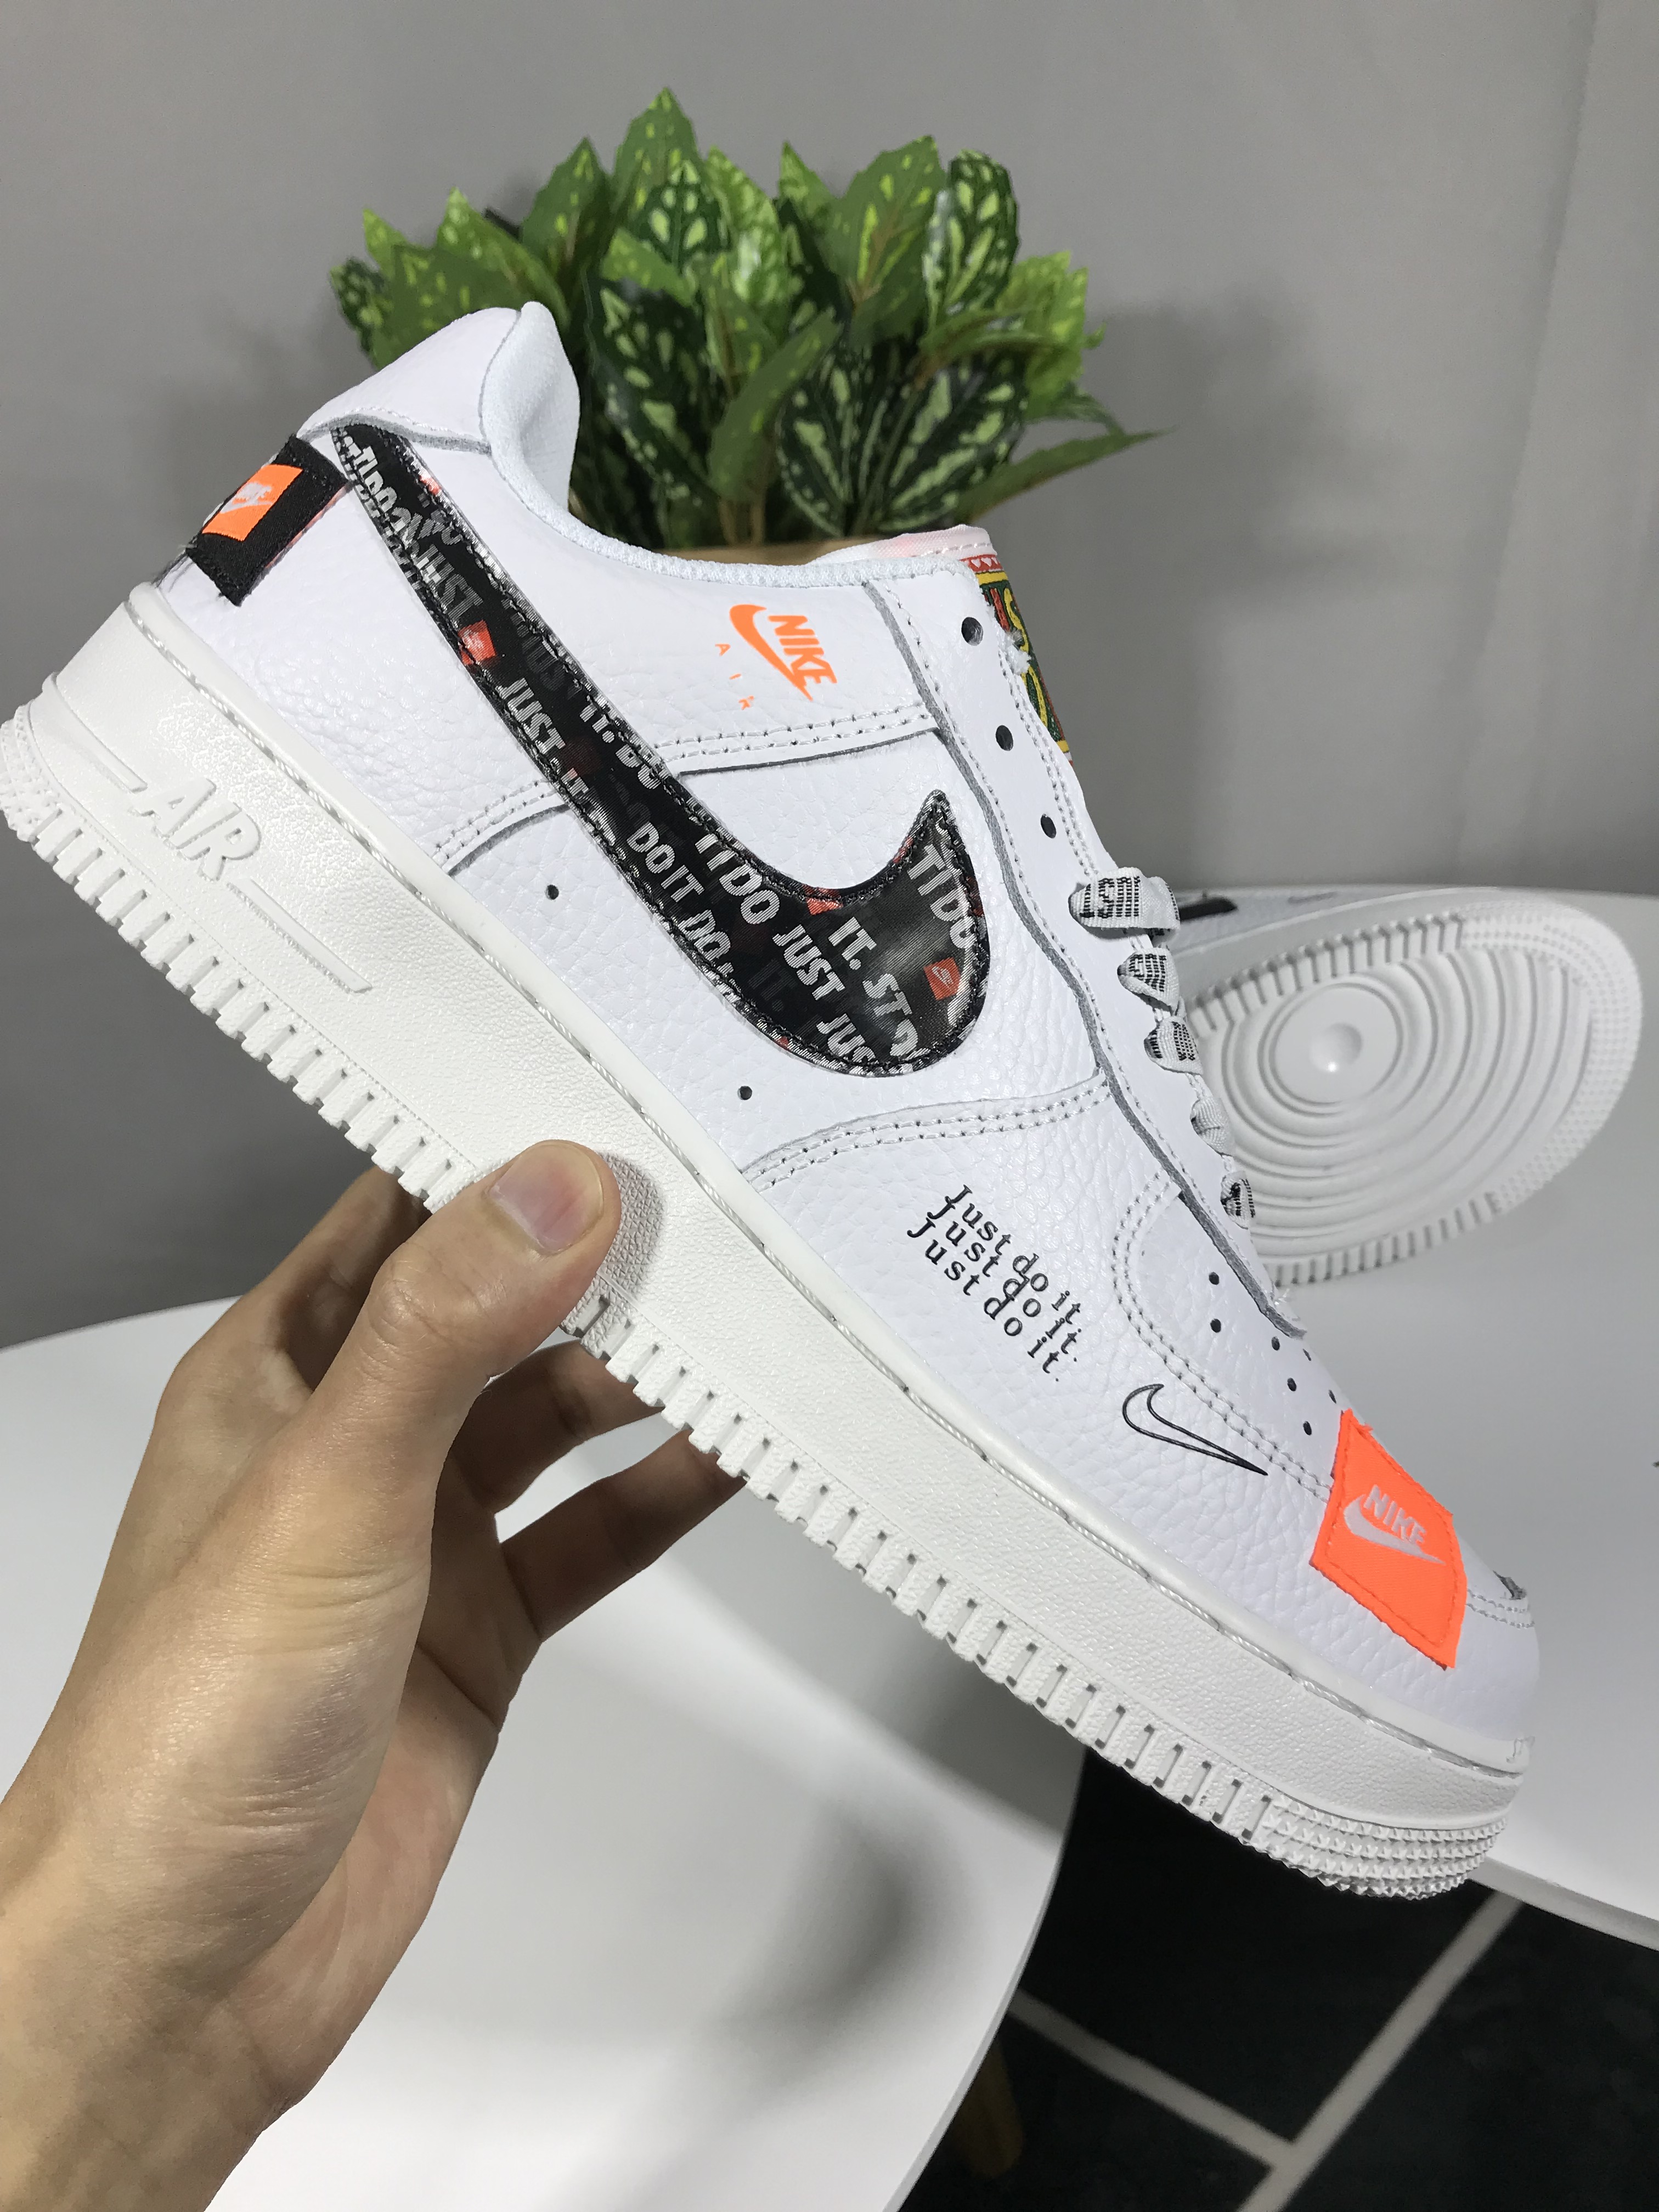 Erfenis Graden Celsius defect Nike Air Force One AR7719 100 Nike Air Force 1 Low "Just Do It" joint  slogan theme limited commemorative white men's and women's shoes 36-45 |  Lazada PH